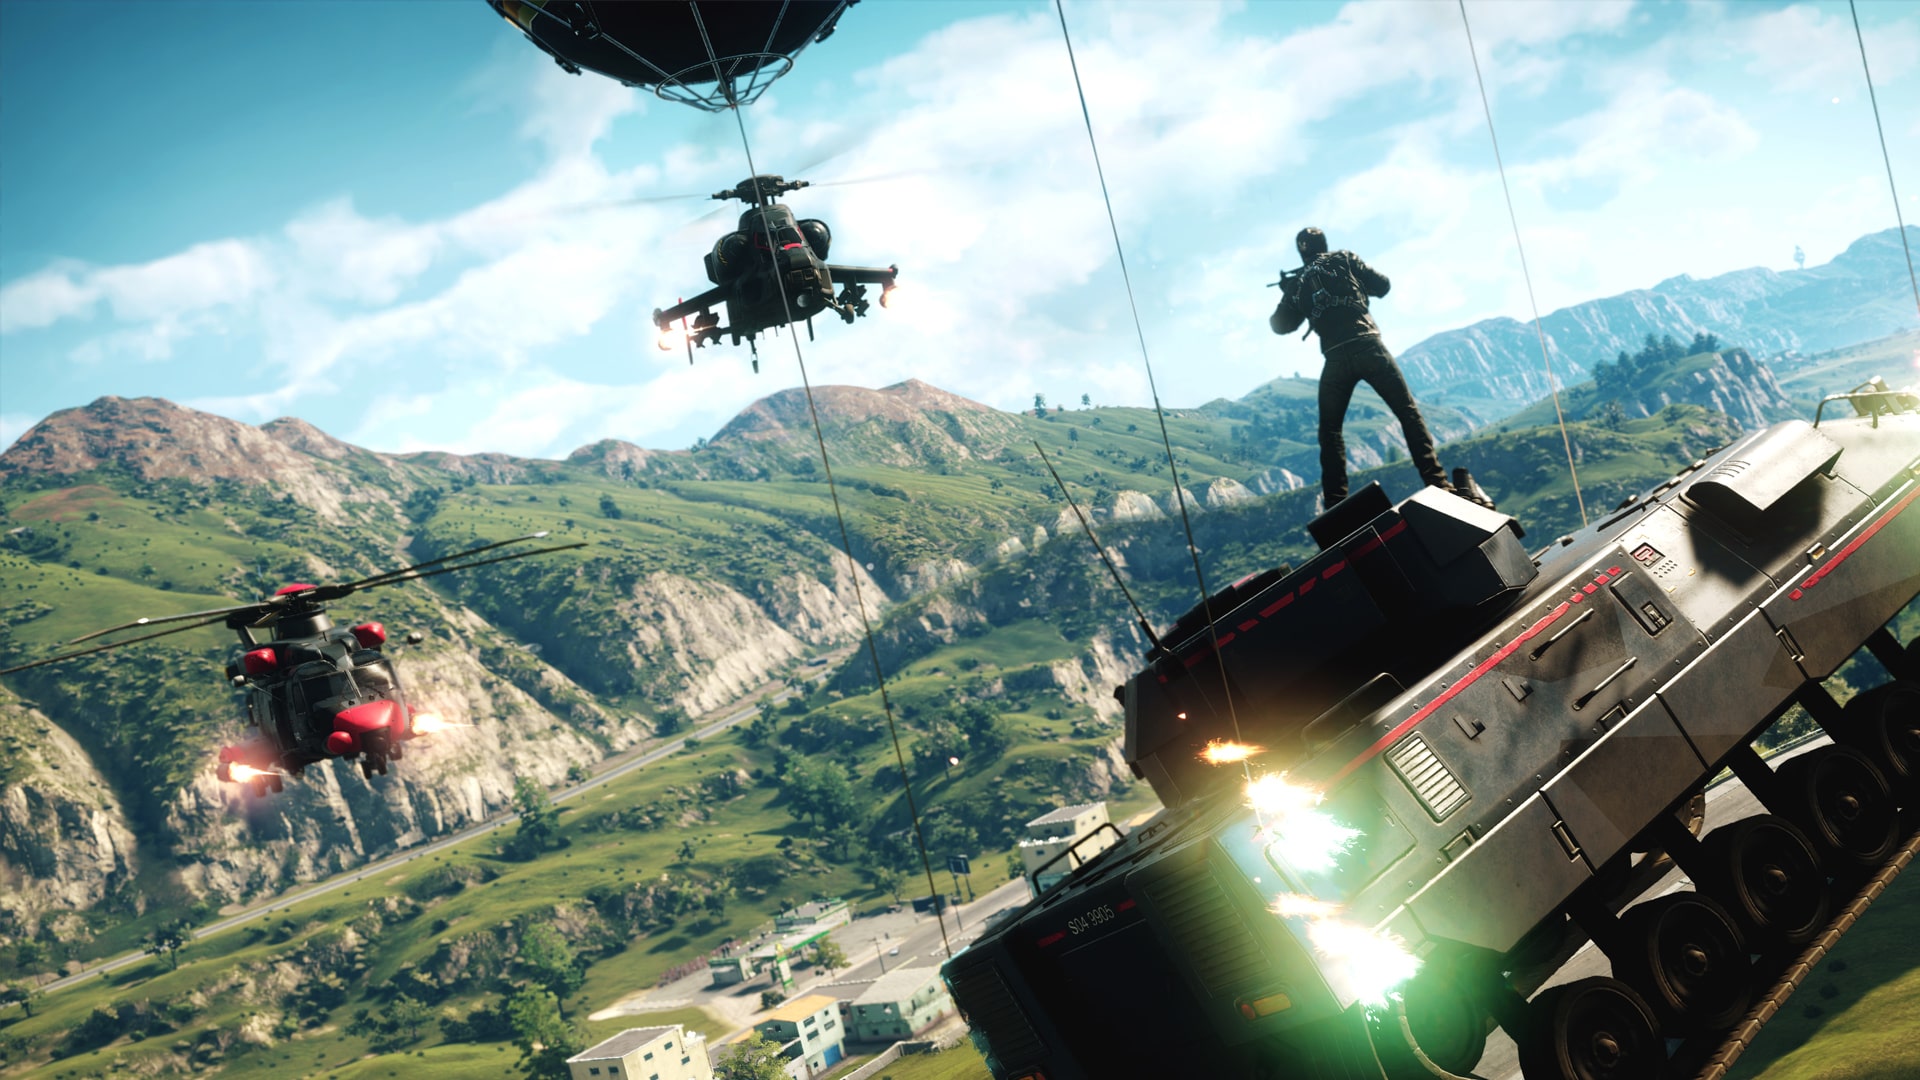 just cause 4 playstation store